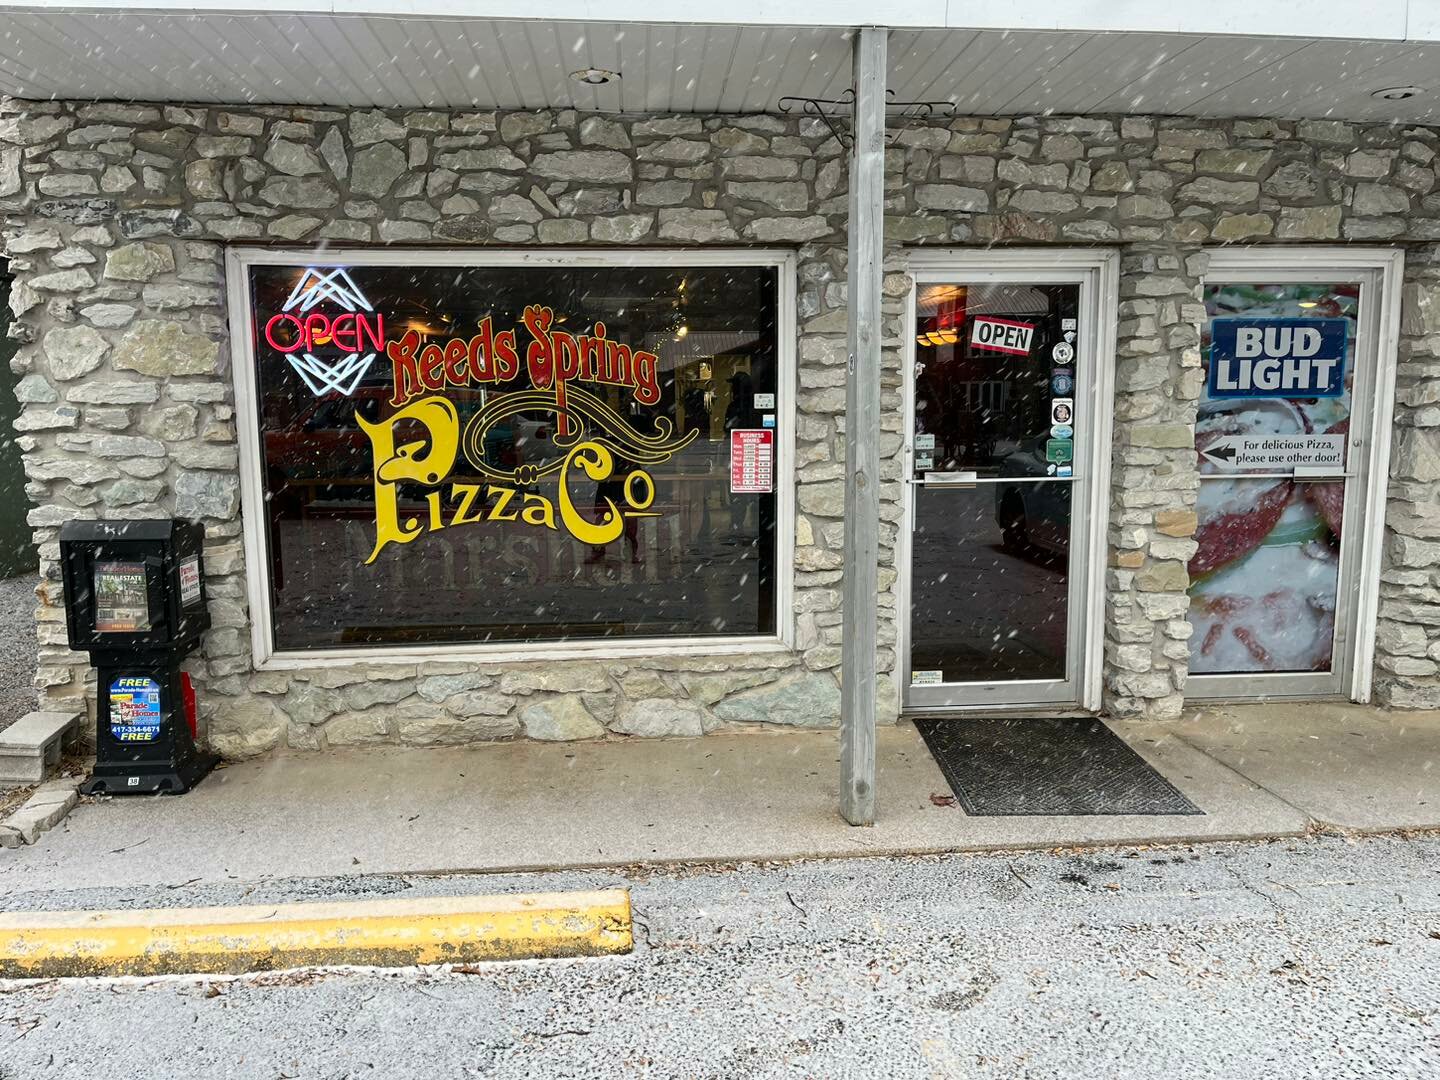 Reeds Spring Pizza Co. operates at 22065 Main St.